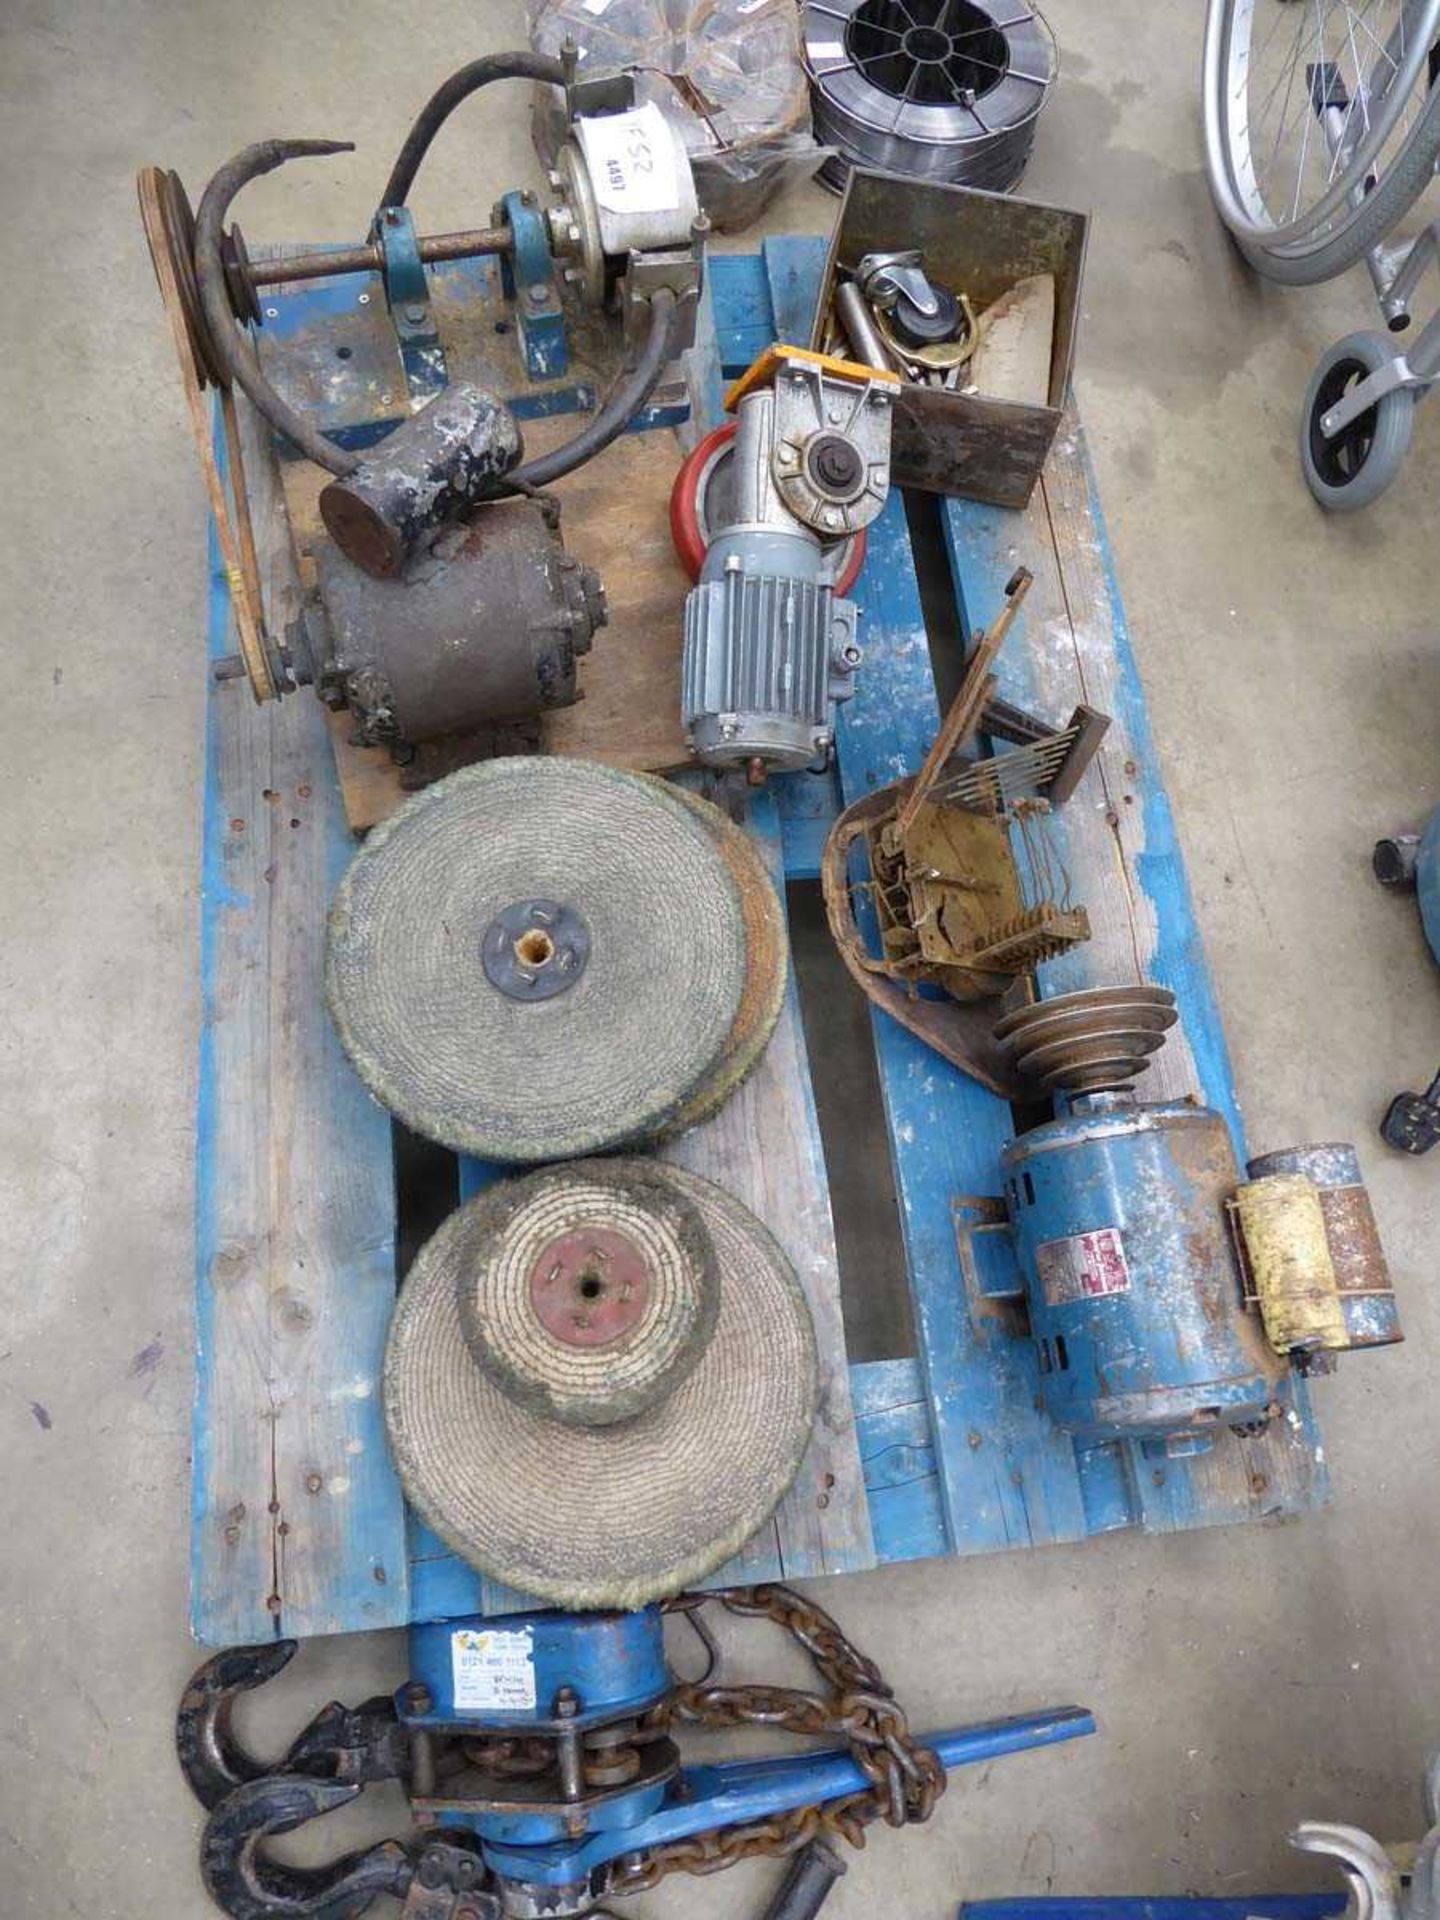 Pallet containing machine parts including electric motors, polishing heads and other parts